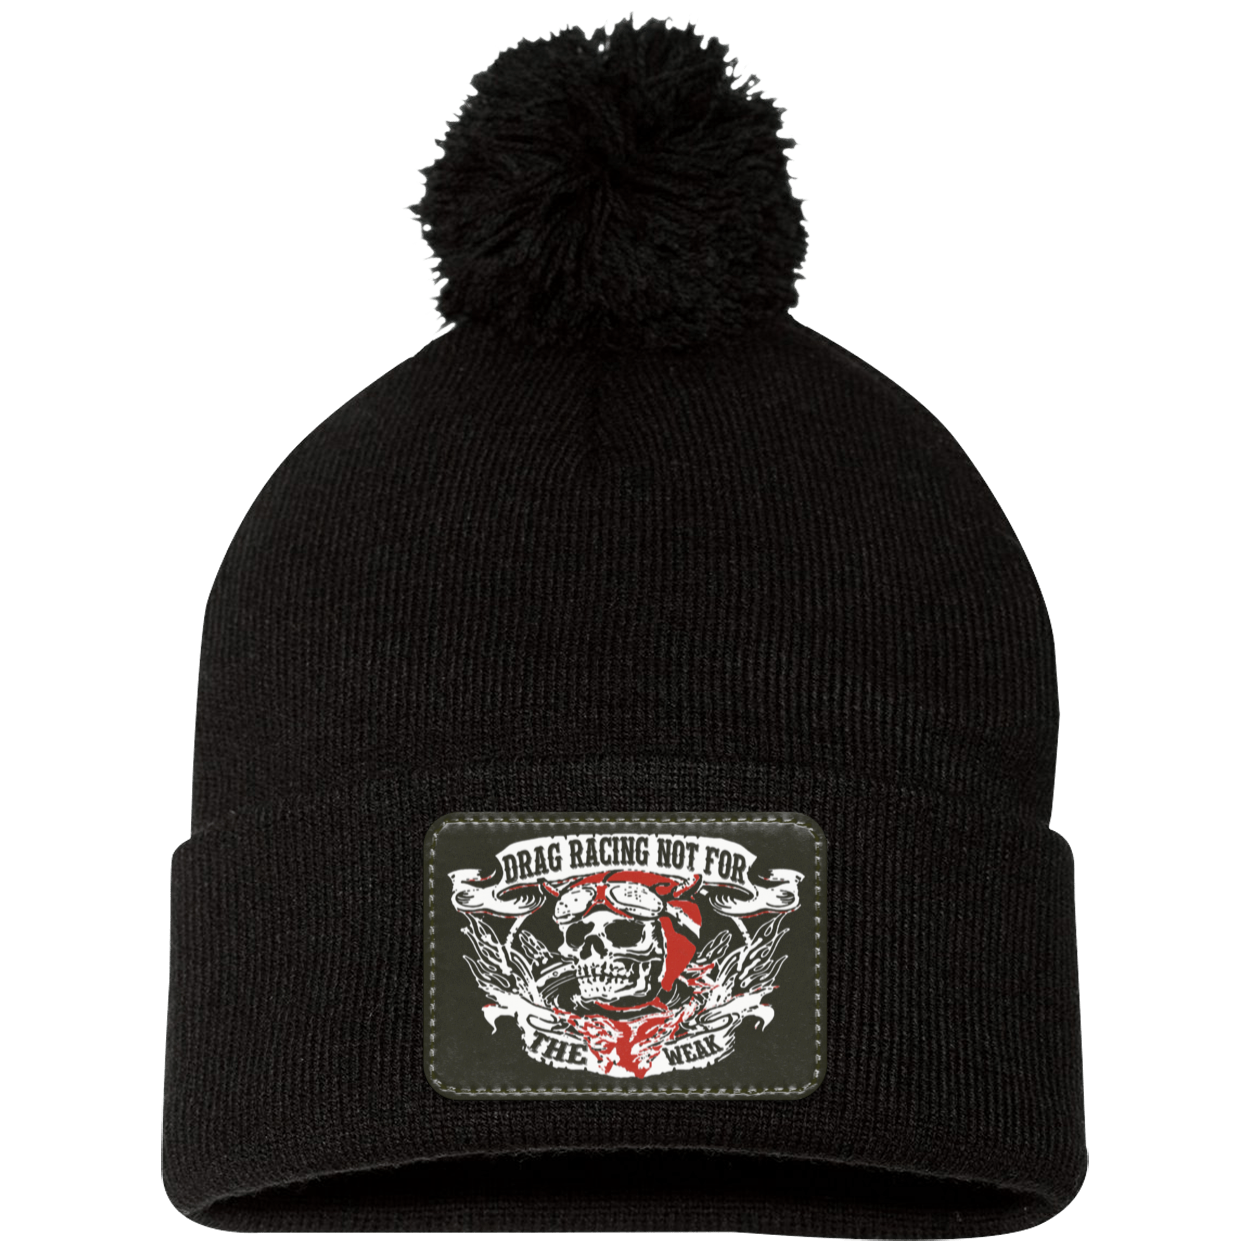 Drag Racing Not For The Weak Patched Pom Pom Knit Cap V1